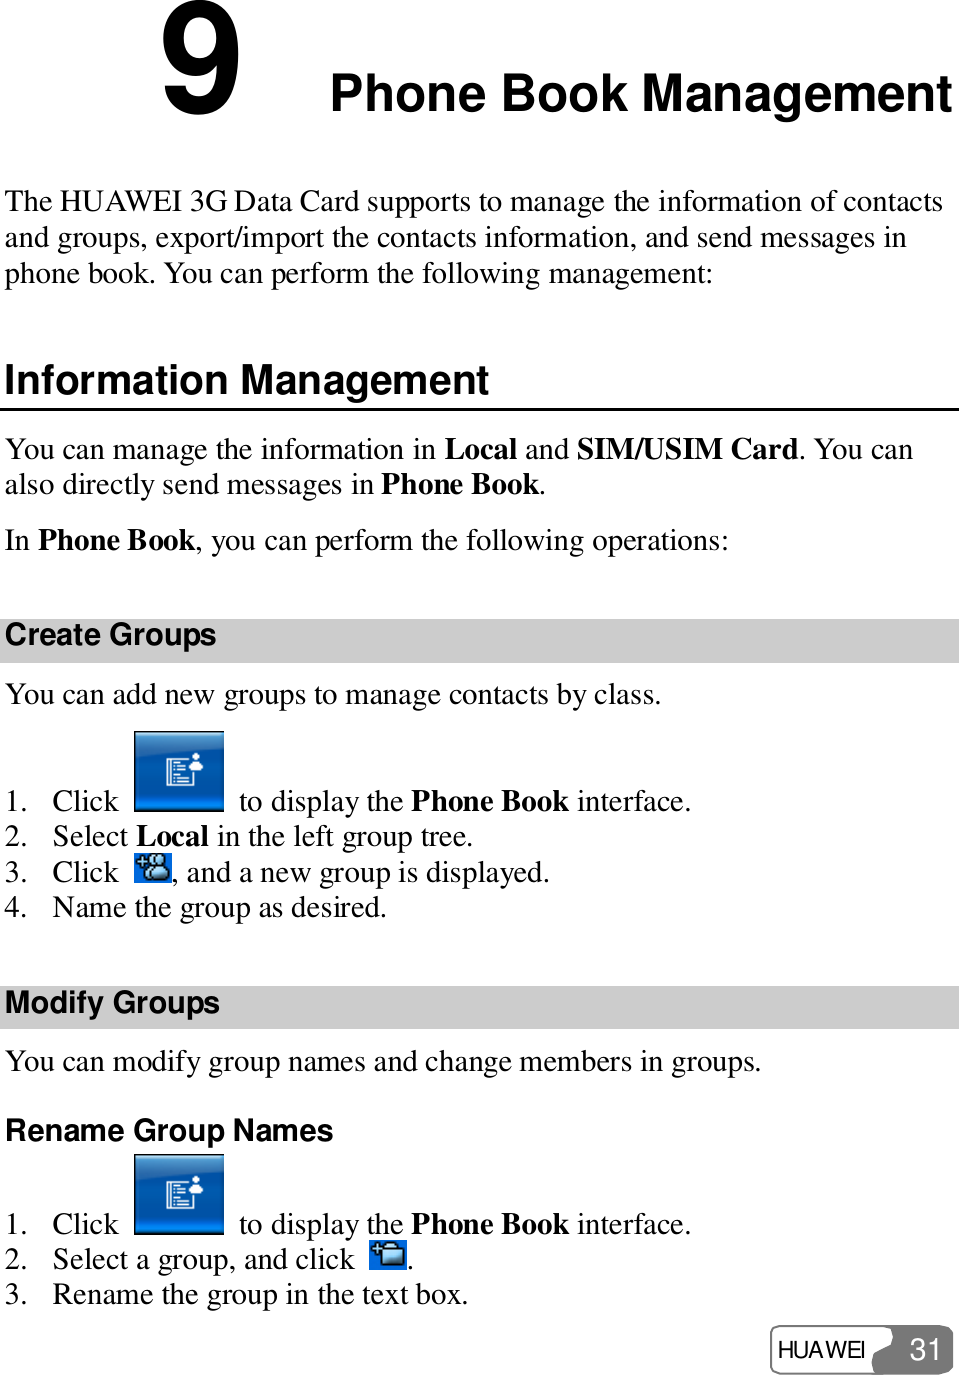  HUAWEI  31 9  Phone Book Management The HUAWEI 3G Data Card supports to manage the information of contacts and groups, export/import the contacts information, and send messages in phone book. You can perform the following management: Information Management You can manage the information in Local and SIM/USIM Card. You can also directly send messages in Phone Book. In Phone Book, you can perform the following operations: Create Groups You can add new groups to manage contacts by class. 1. Click   to display the Phone Book interface. 2. Select Local in the left group tree. 3. Click  , and a new group is displayed. 4. Name the group as desired. Modify Groups You can modify group names and change members in groups. Rename Group Names 1. Click   to display the Phone Book interface. 2. Select a group, and click  . 3. Rename the group in the text box. 